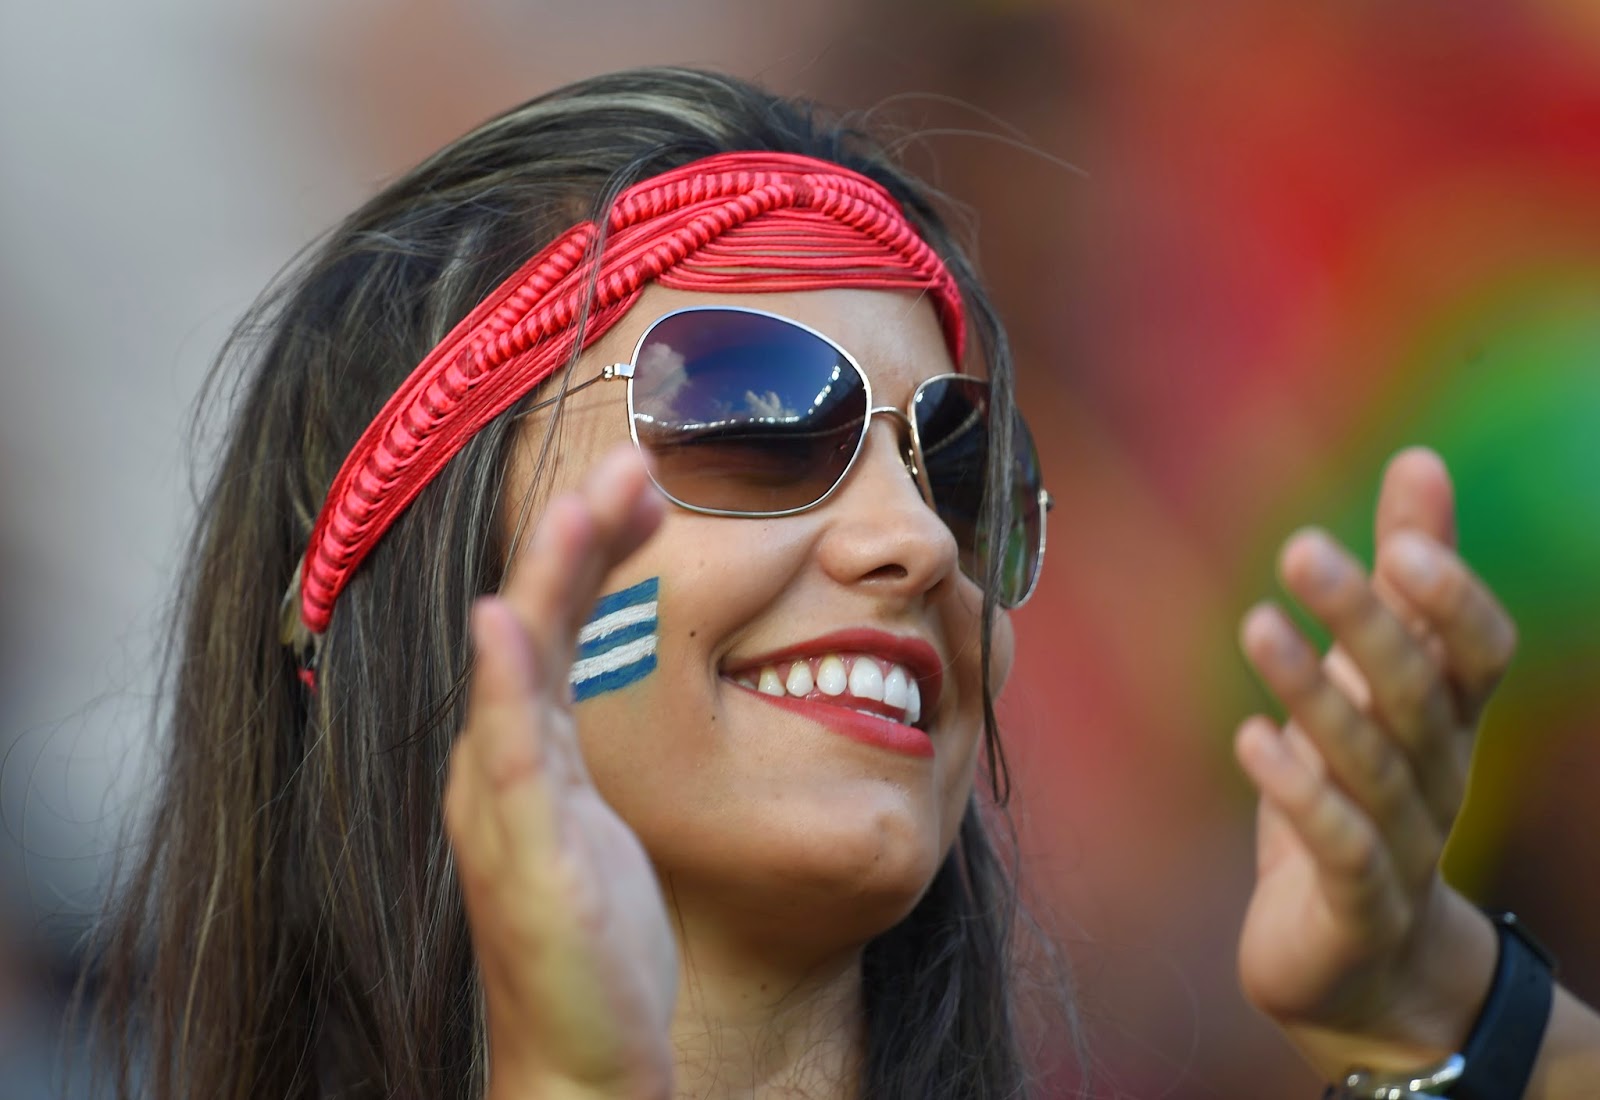 FIFA World Cup 2014: Costa Rica vs Greece 52th Match in Pictures ...